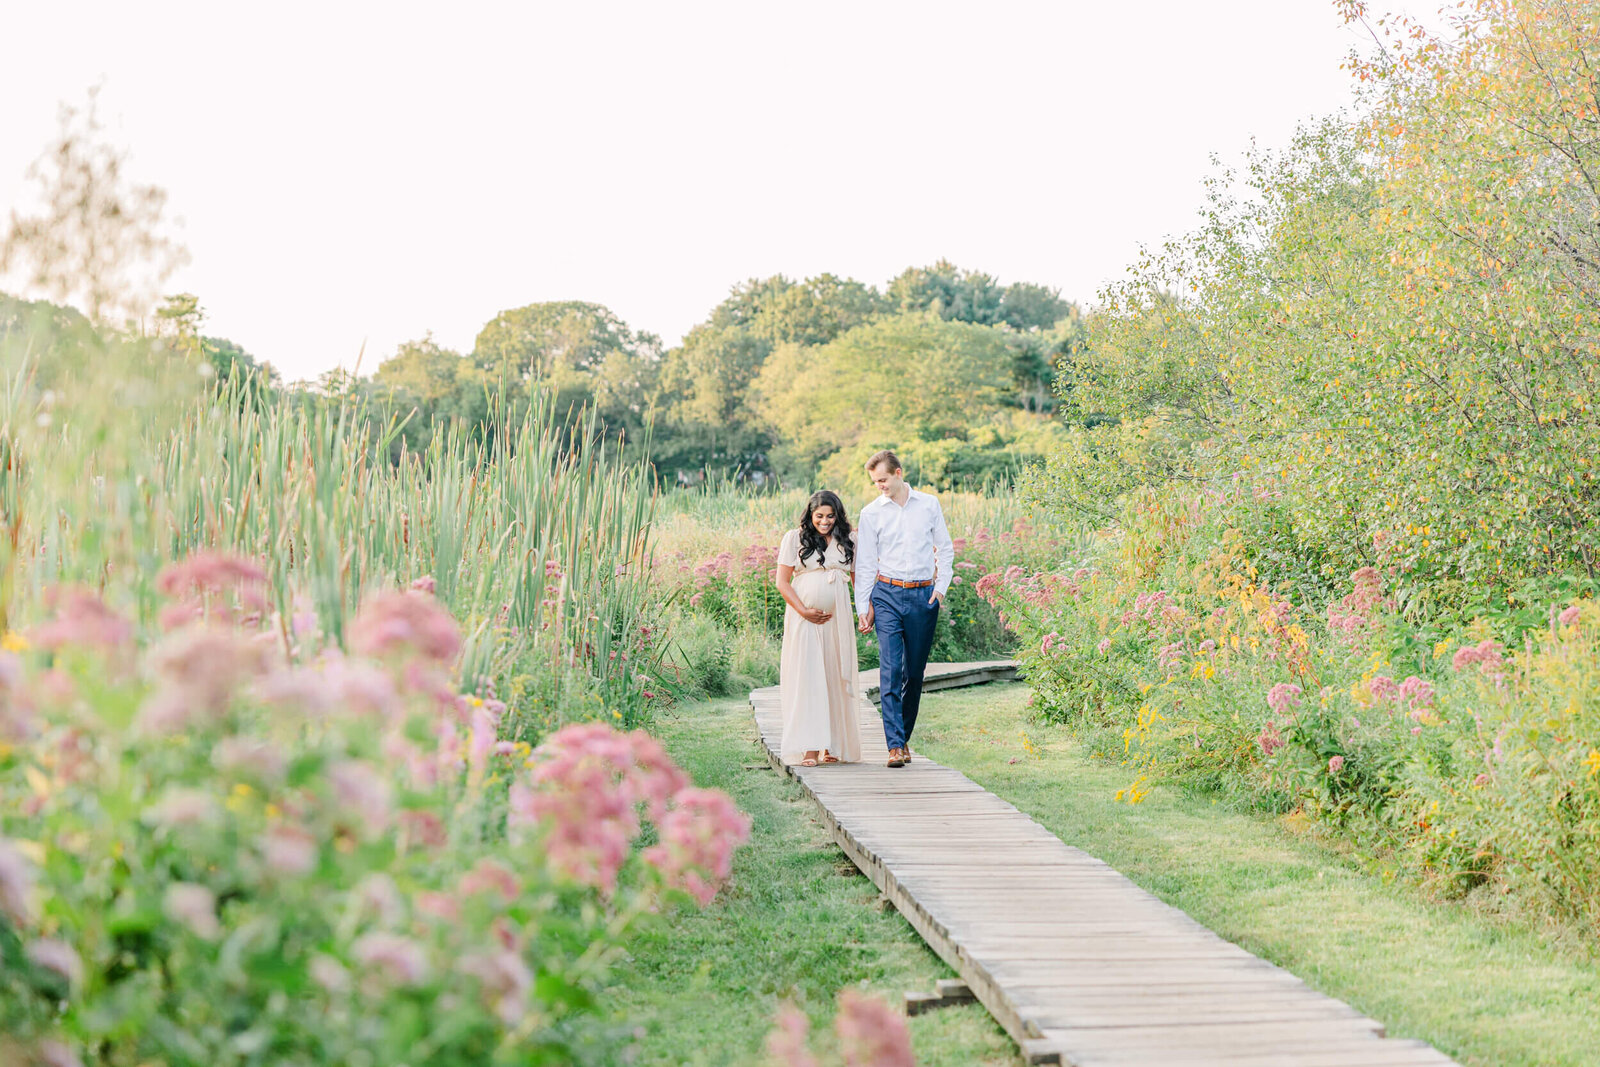 Pulled back view of a pregnant woman and her husband walking together on a wooden path between summer wildflowers, cattails and trees